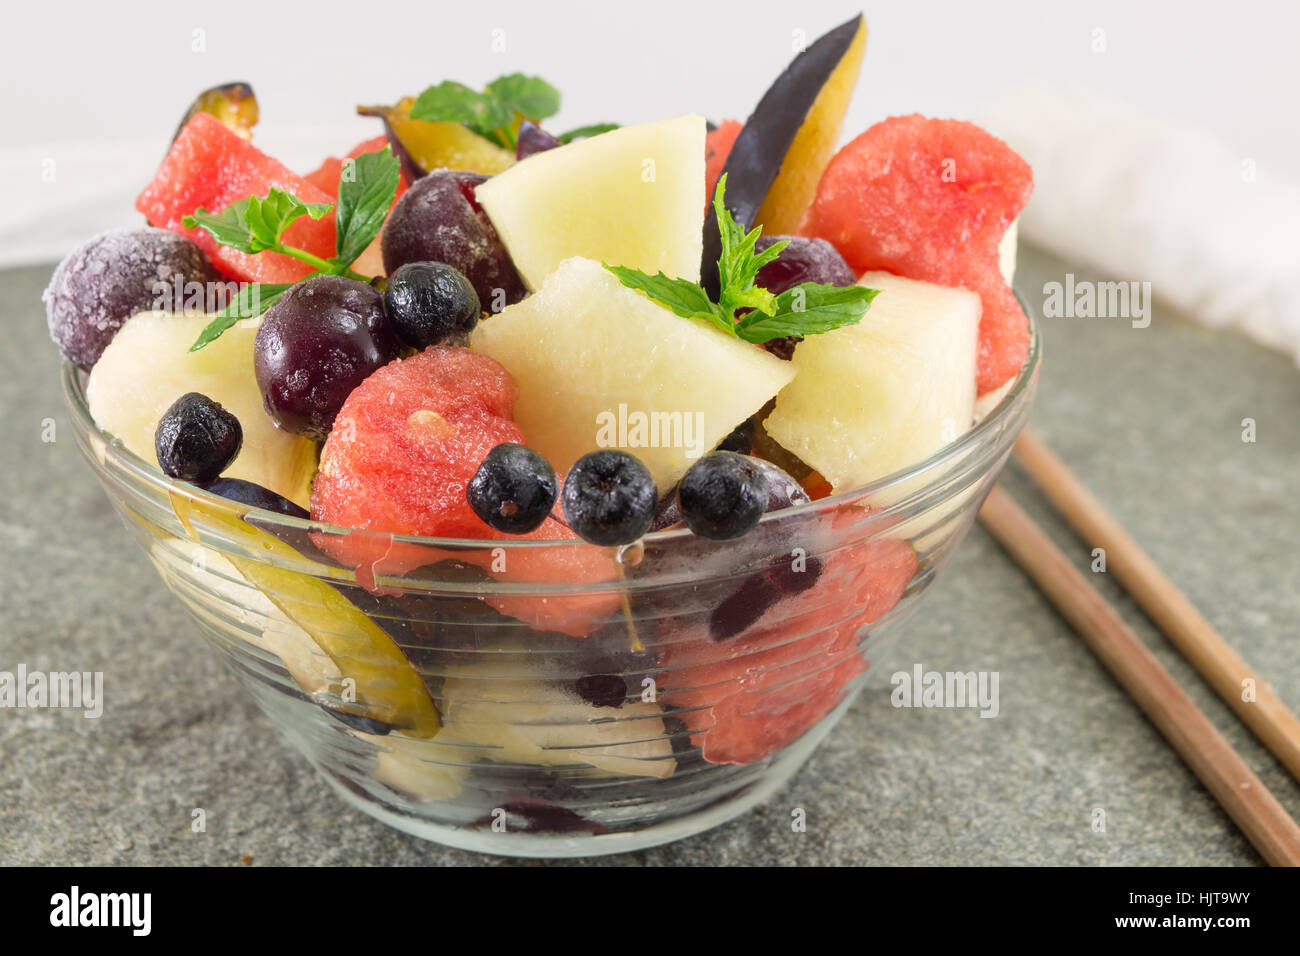 fruit salad served in a glass bowl with heartshaped watermellon slices Stock Photo